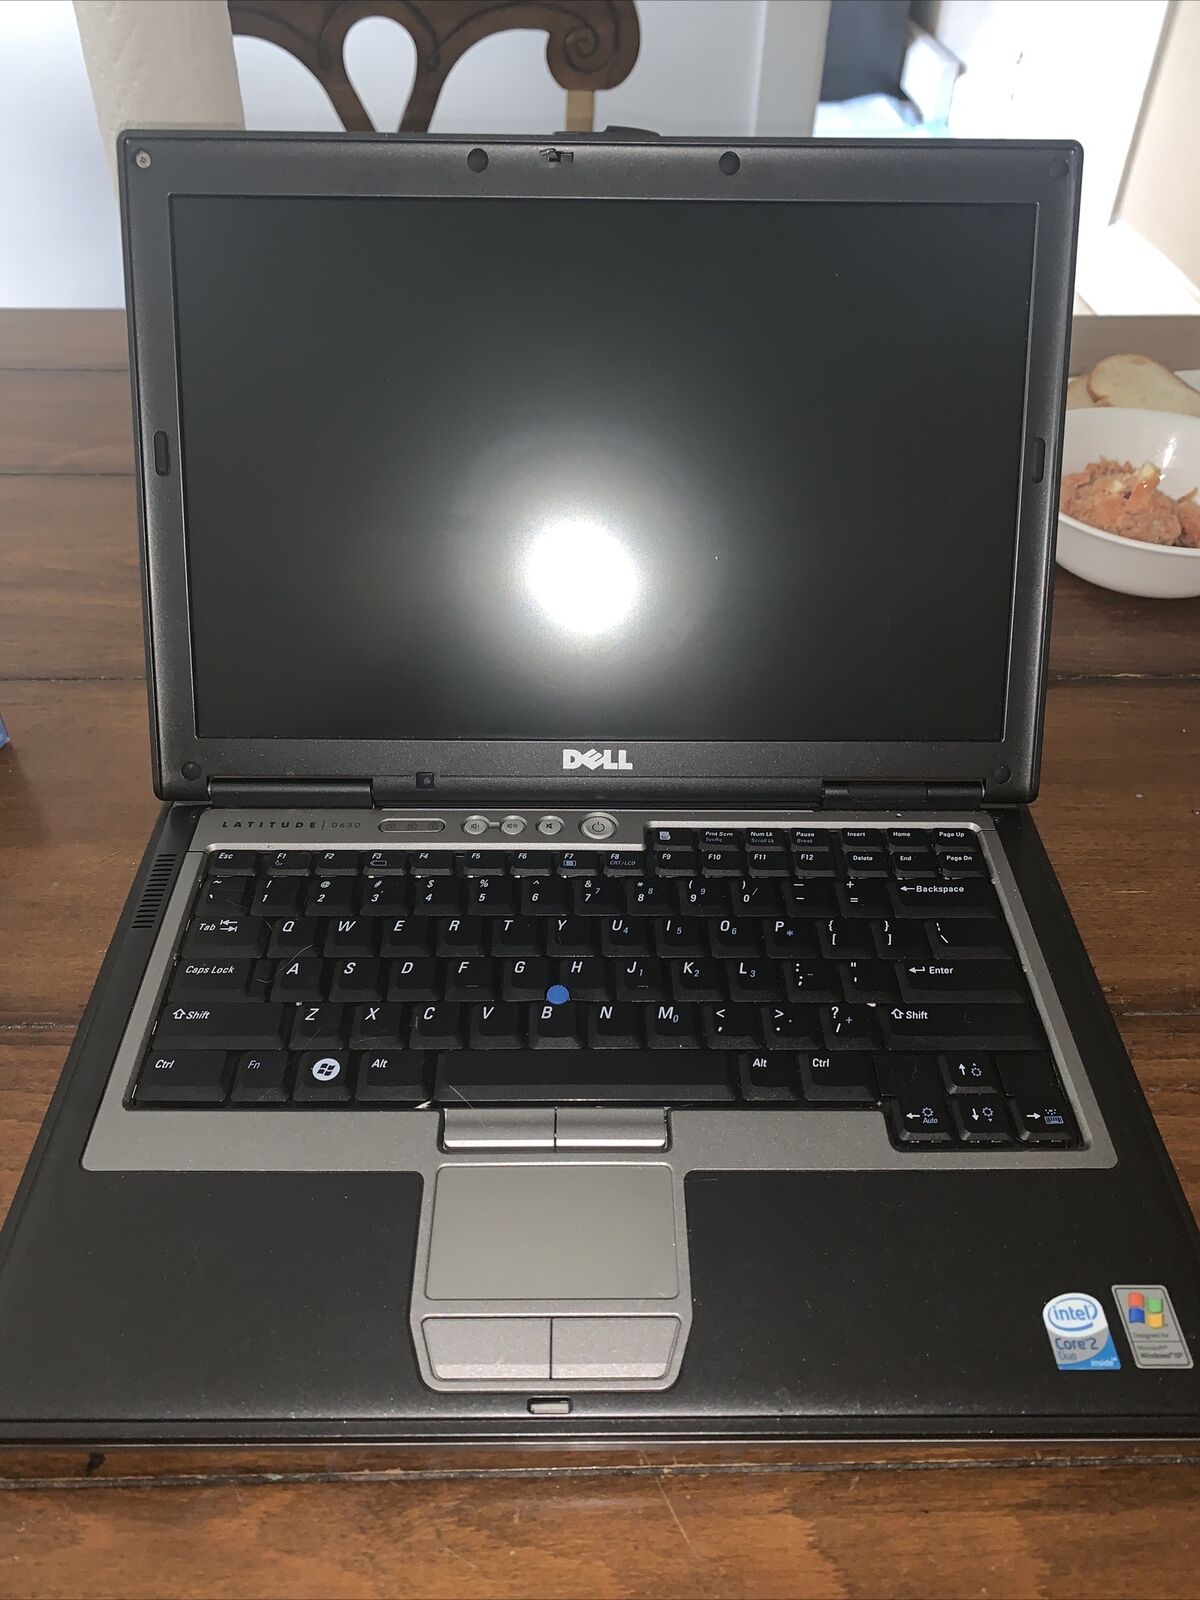 Dell D620 Laptop: Windows XP / WIFI /DVD (NOT TESTED, NO CHORD) AS-IS SALE